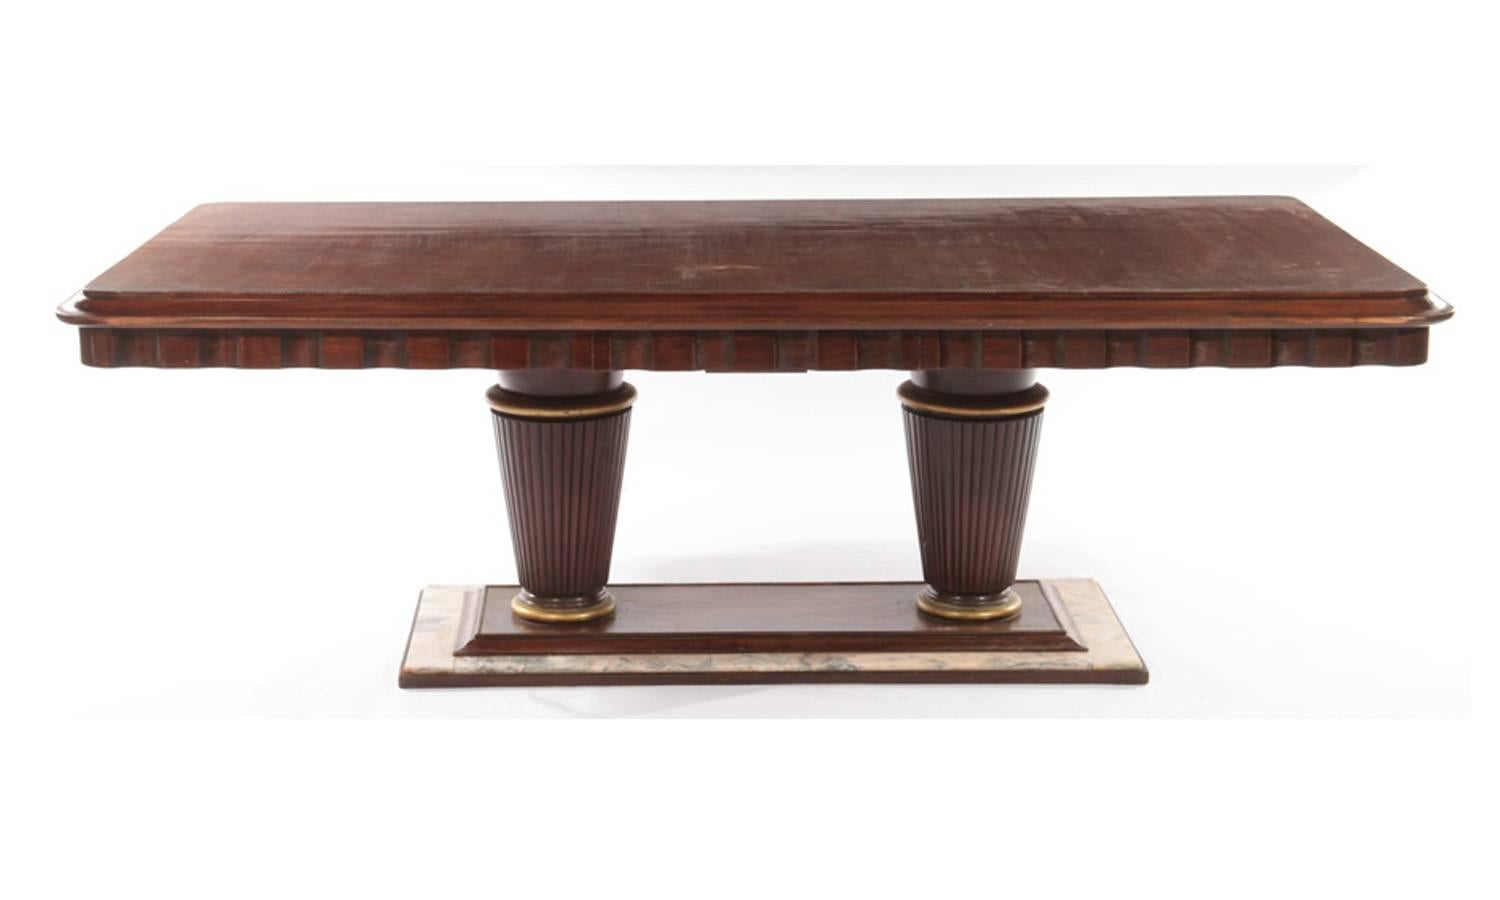 A mahogany and marble Art Deco dining room table, circa 1935. Continuous fluted top, with two large columns and marble as base. Has a storage drawer on 1 side. Could use some touchup and refinishing, this is reflected in the price.

Architect, Sandy